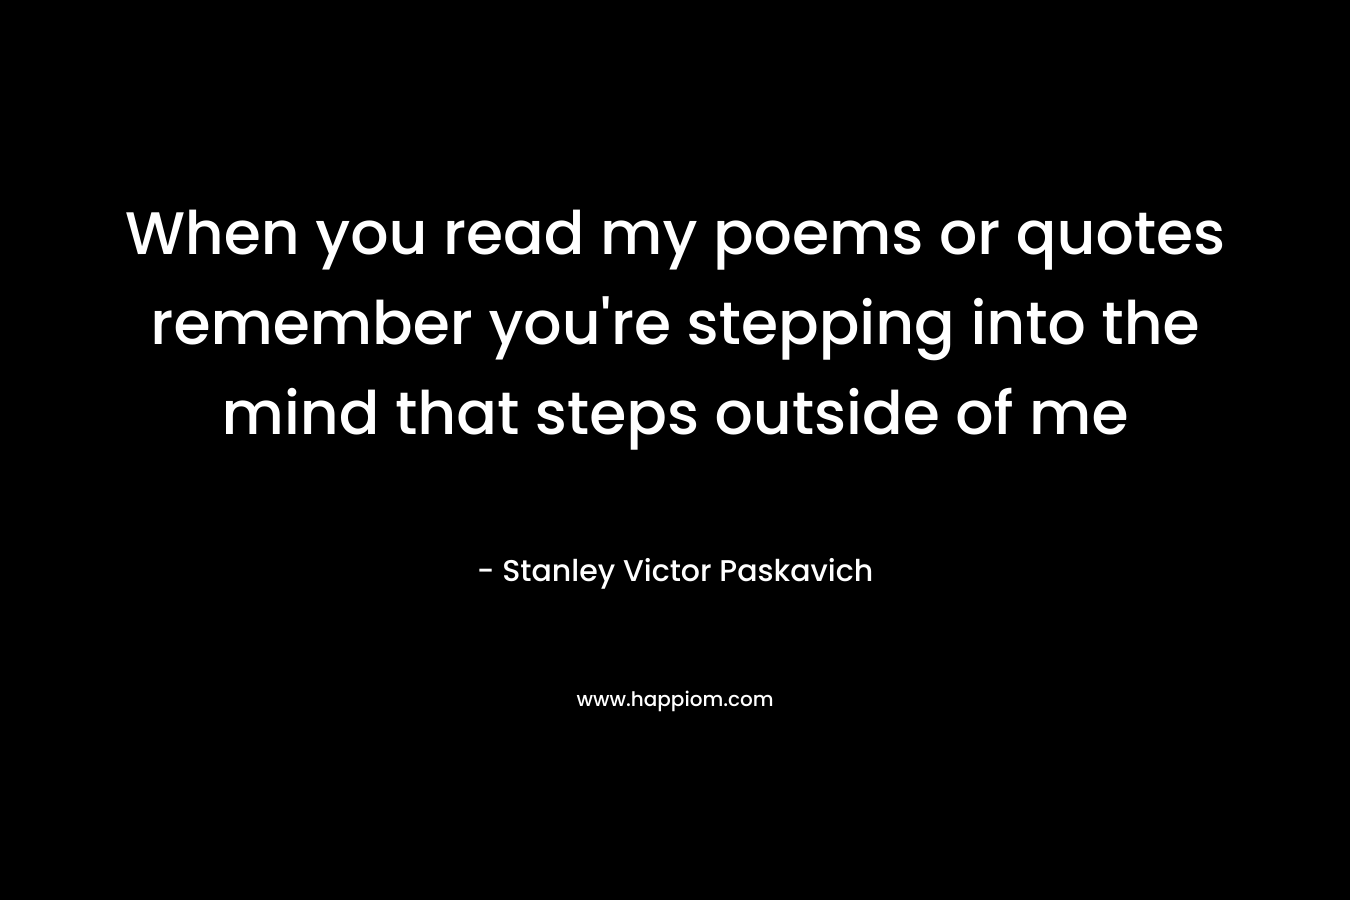 When you read my poems or quotes remember you're stepping into the mind that steps outside of me